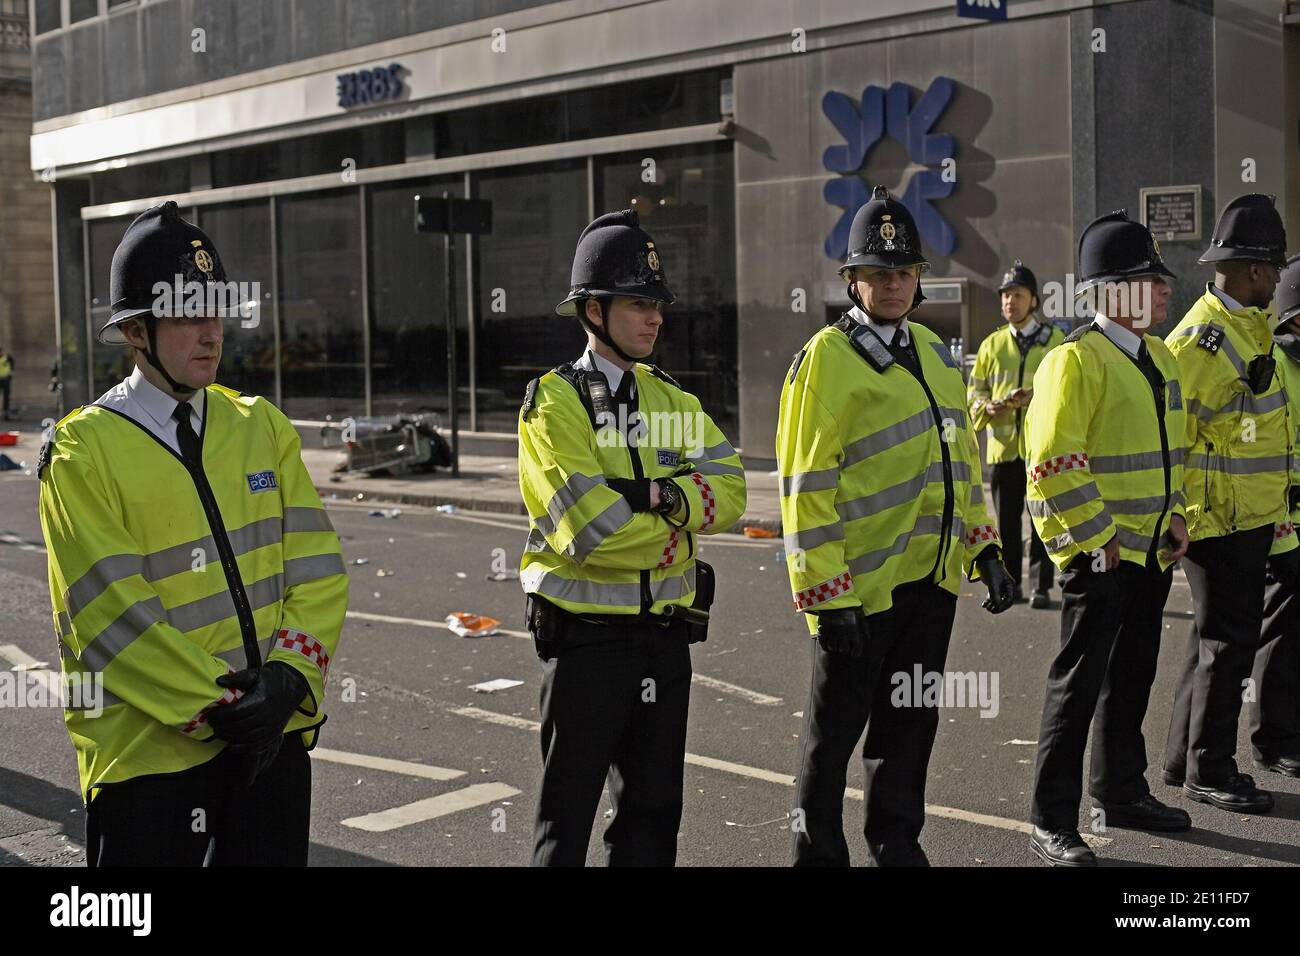 GREAT BRITAIN / England / London / Police block access to a branch of Royal bank of Scotland during  anti capitalist and climate change protest. Stock Photo